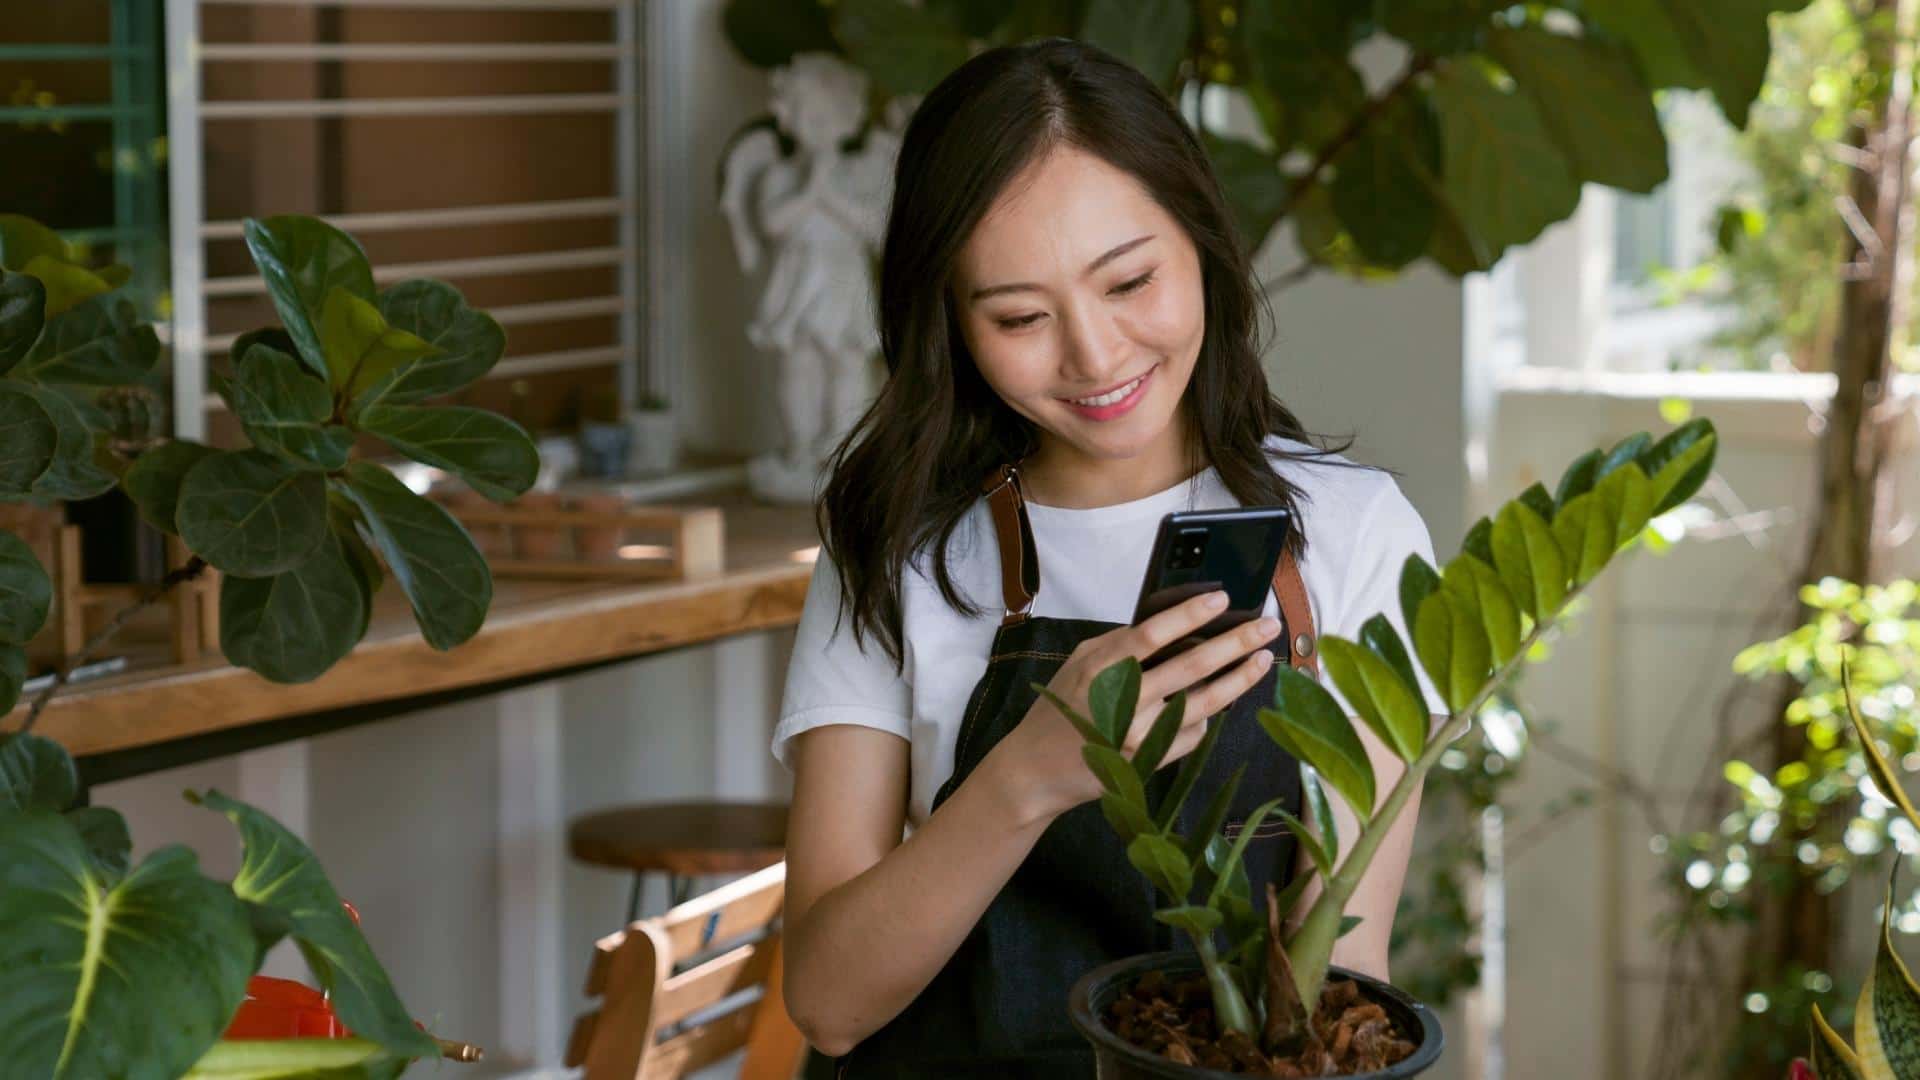 A woman dressed in a white shirt and overalls is surrounded by potted plants and she takes a photo of one in front of her with her phone.